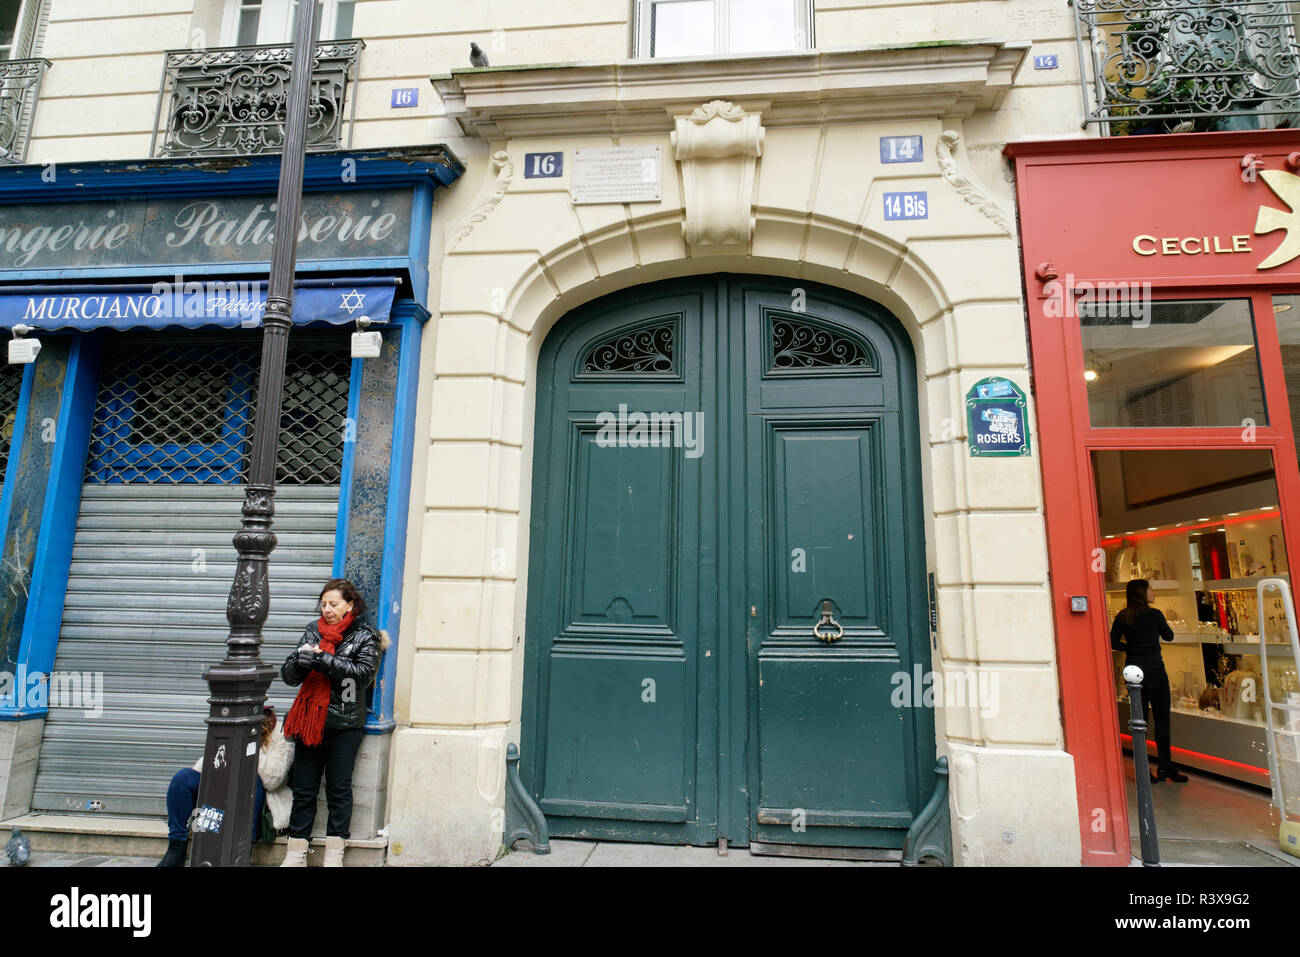 A house and shops on the Rue des Rosiers in the Marais, Paris. A plaque  lists Jews who lived there, who were deported and killed during World War II. Stock Photo